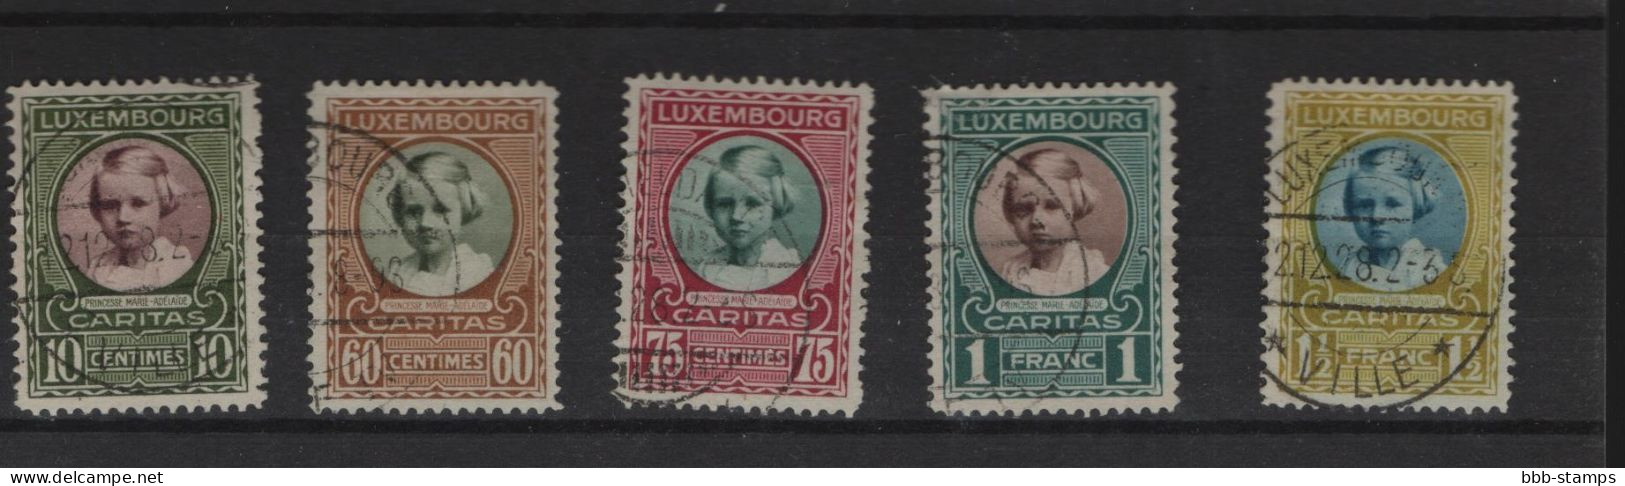 Luxemburg Michel Cat.No.  Used  208/212 (2) - Used Stamps